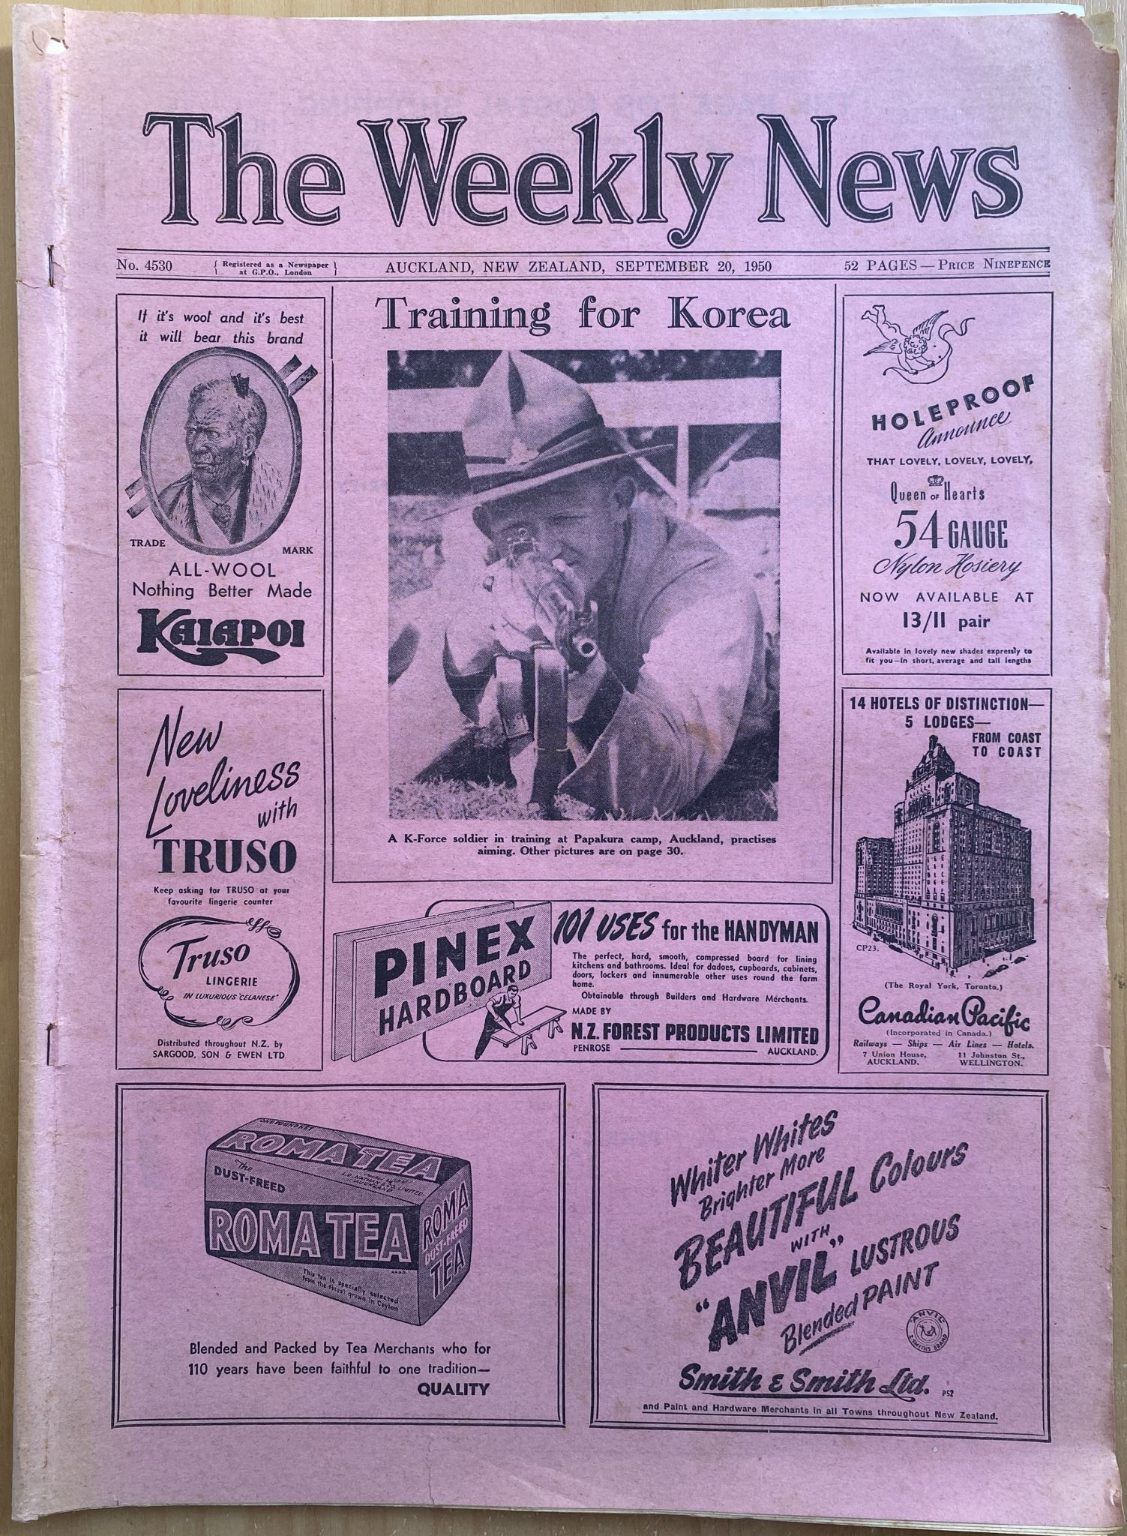 OLD NEWSPAPER: The Weekly News, No. 4530, 20 September 1950